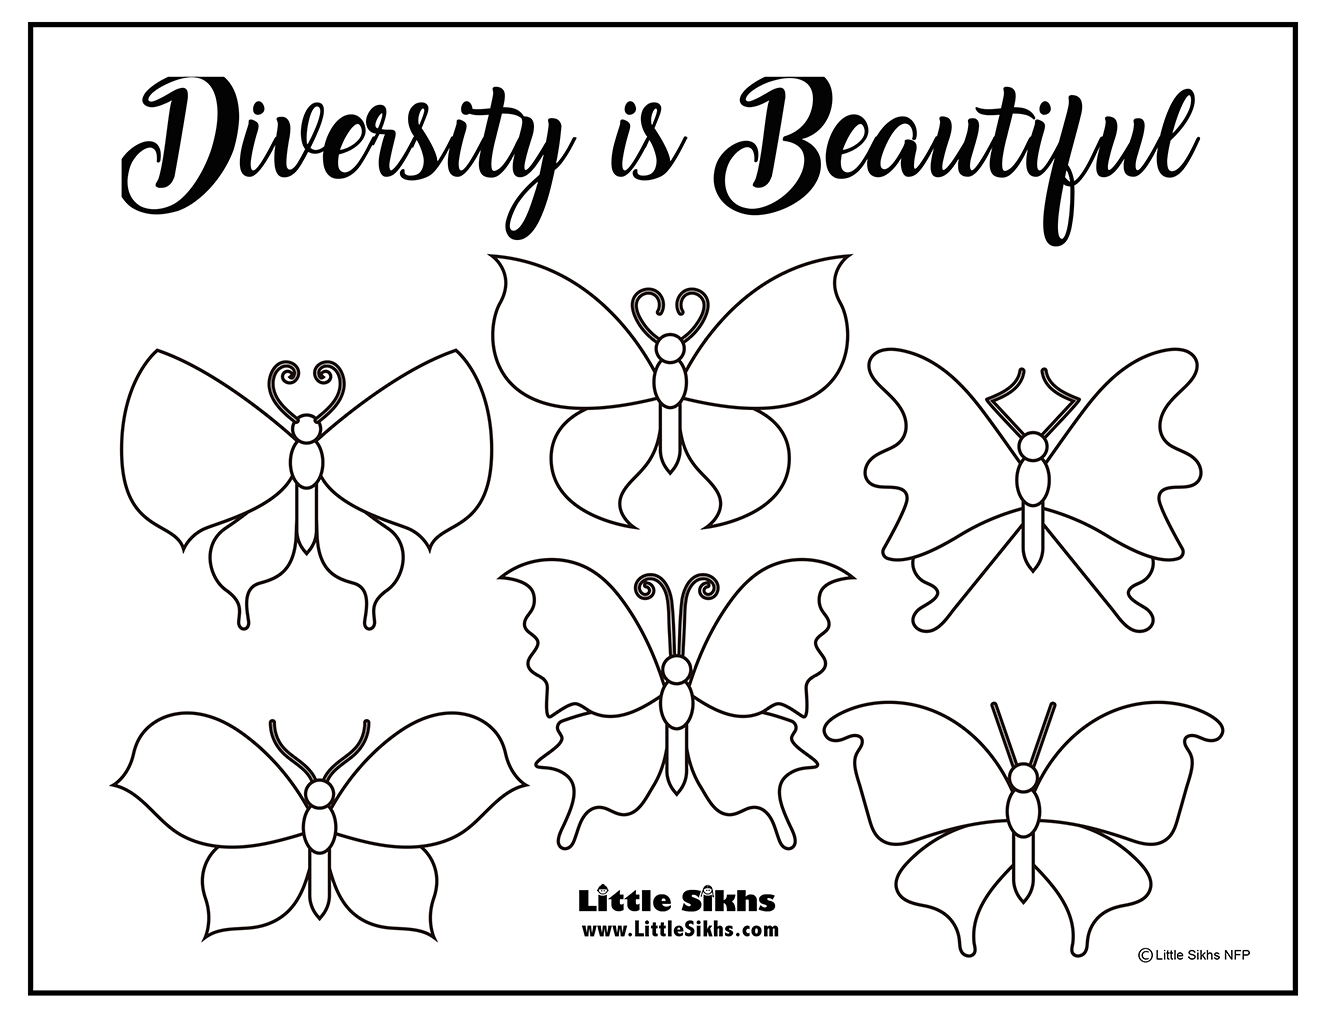 Diversity is Beautiful (Diversity Coloring Page)